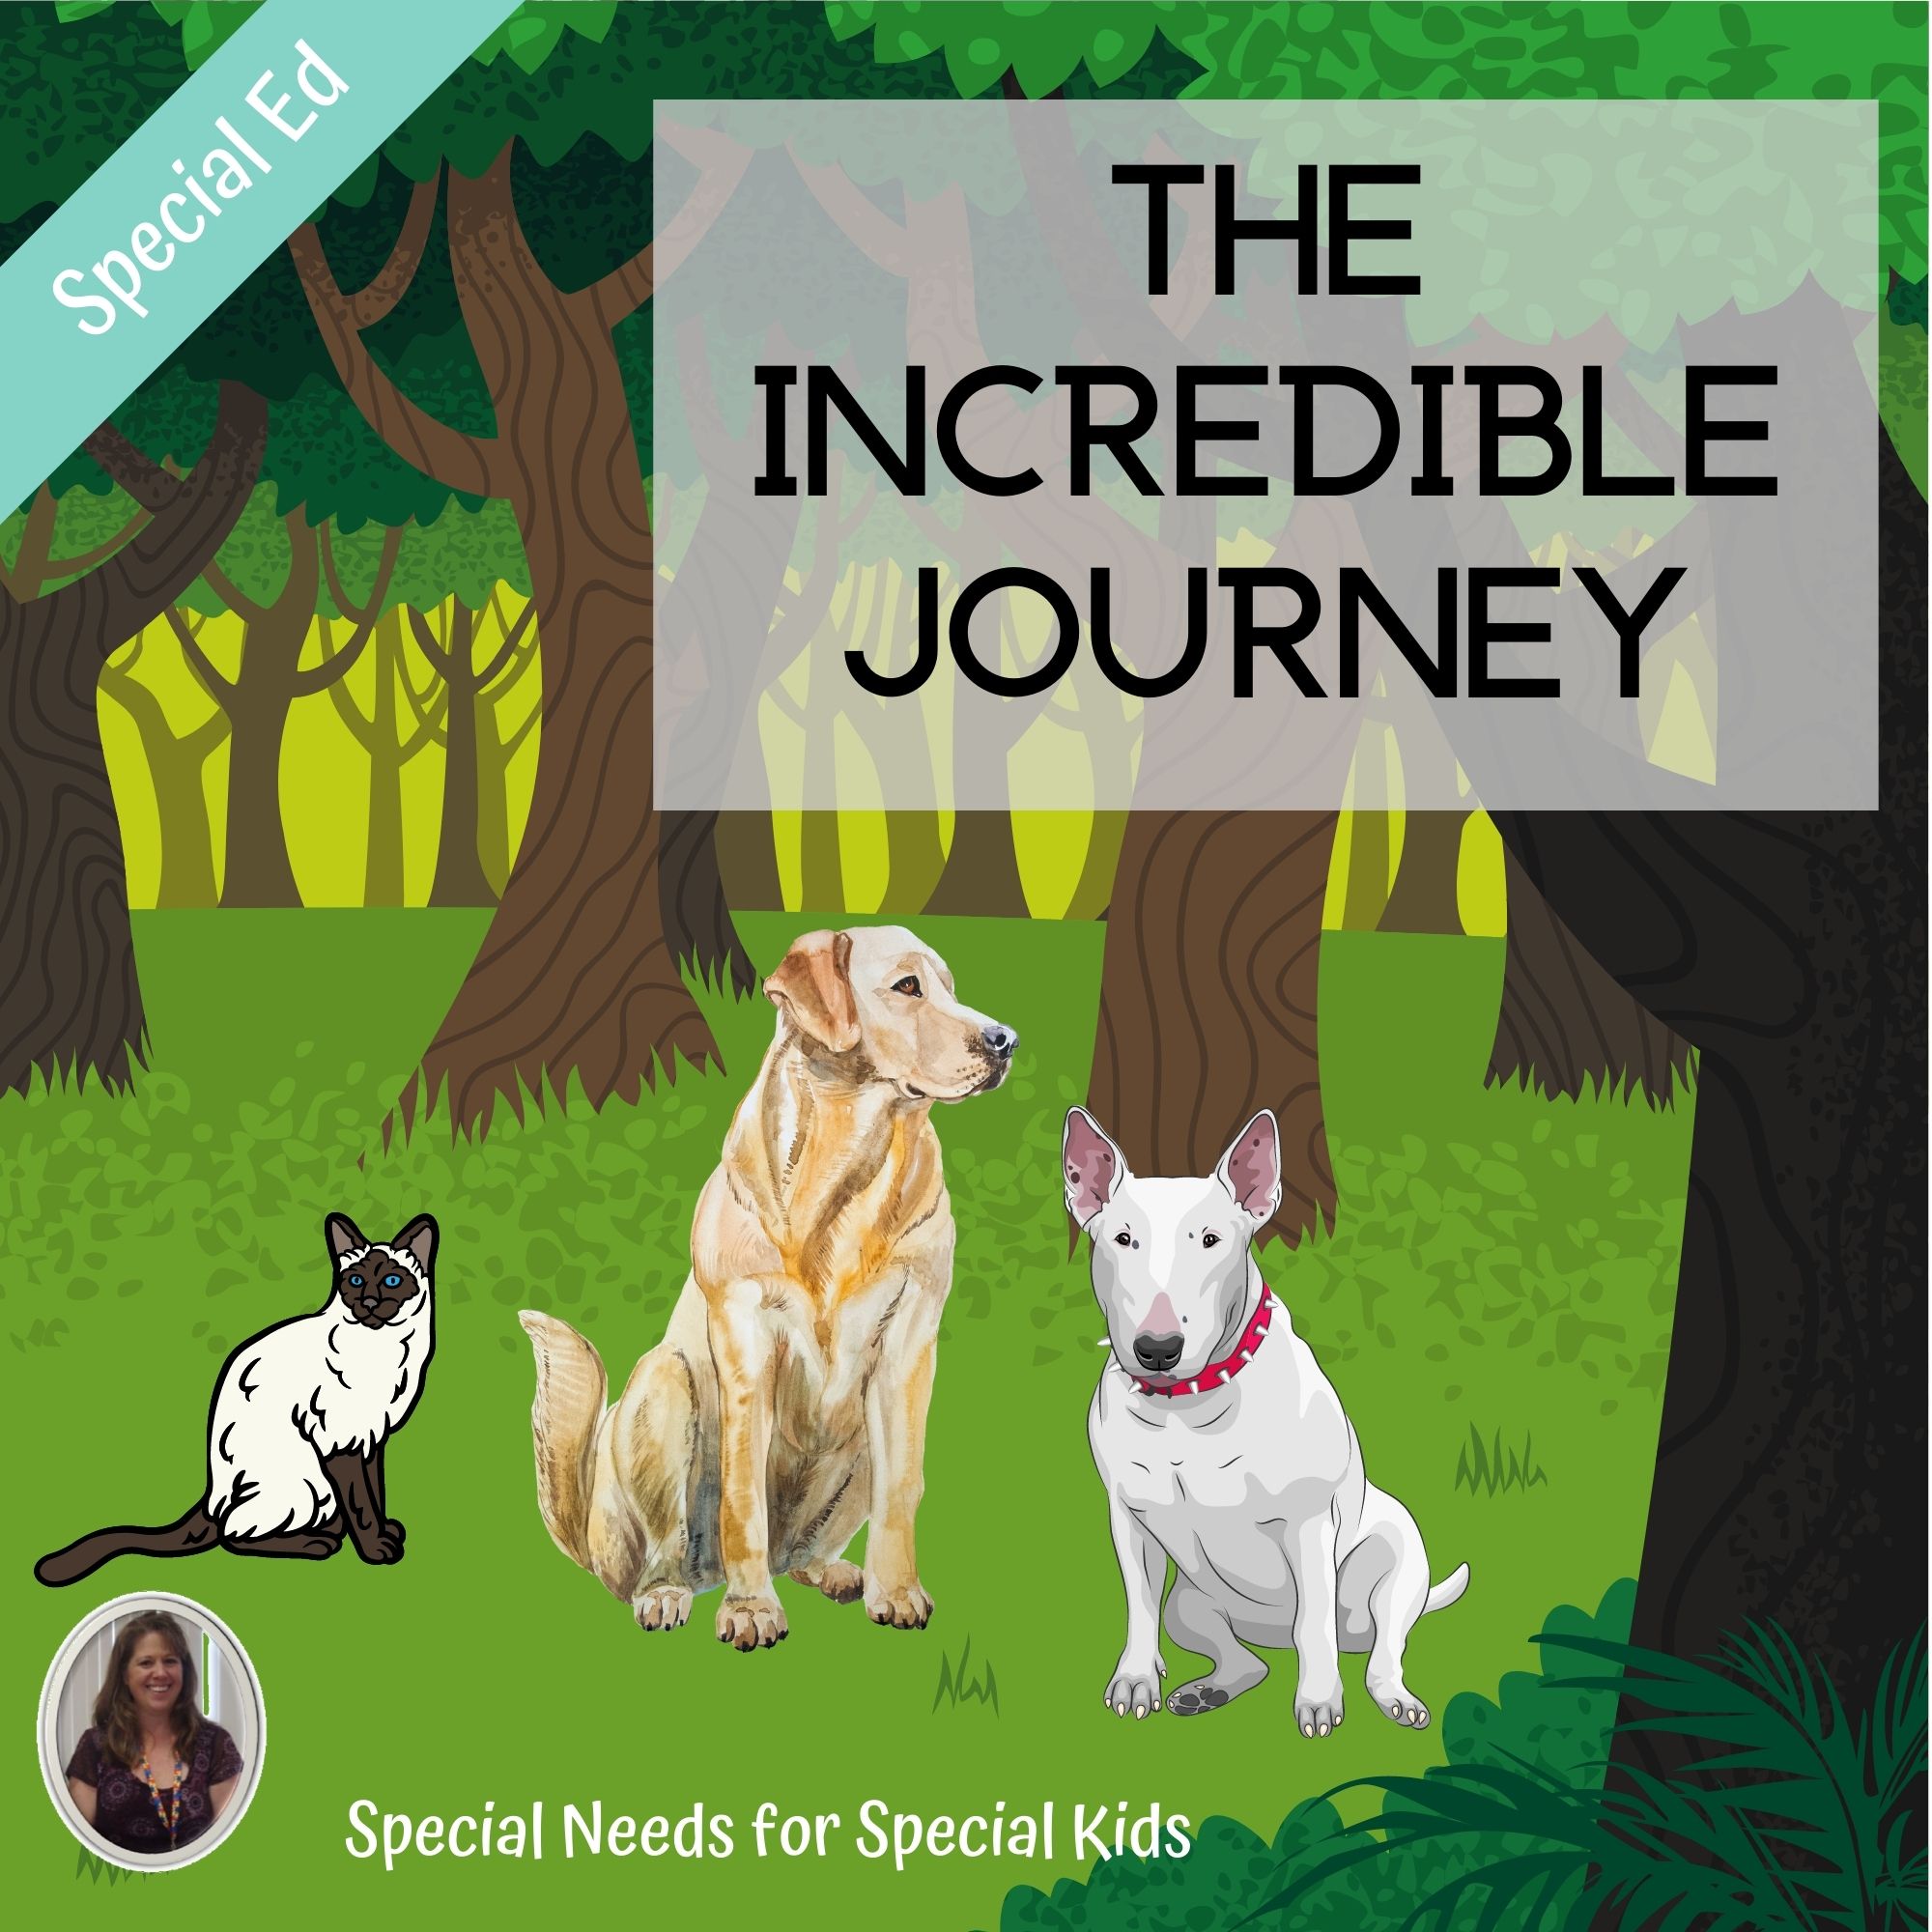 the incredible journey goodreads